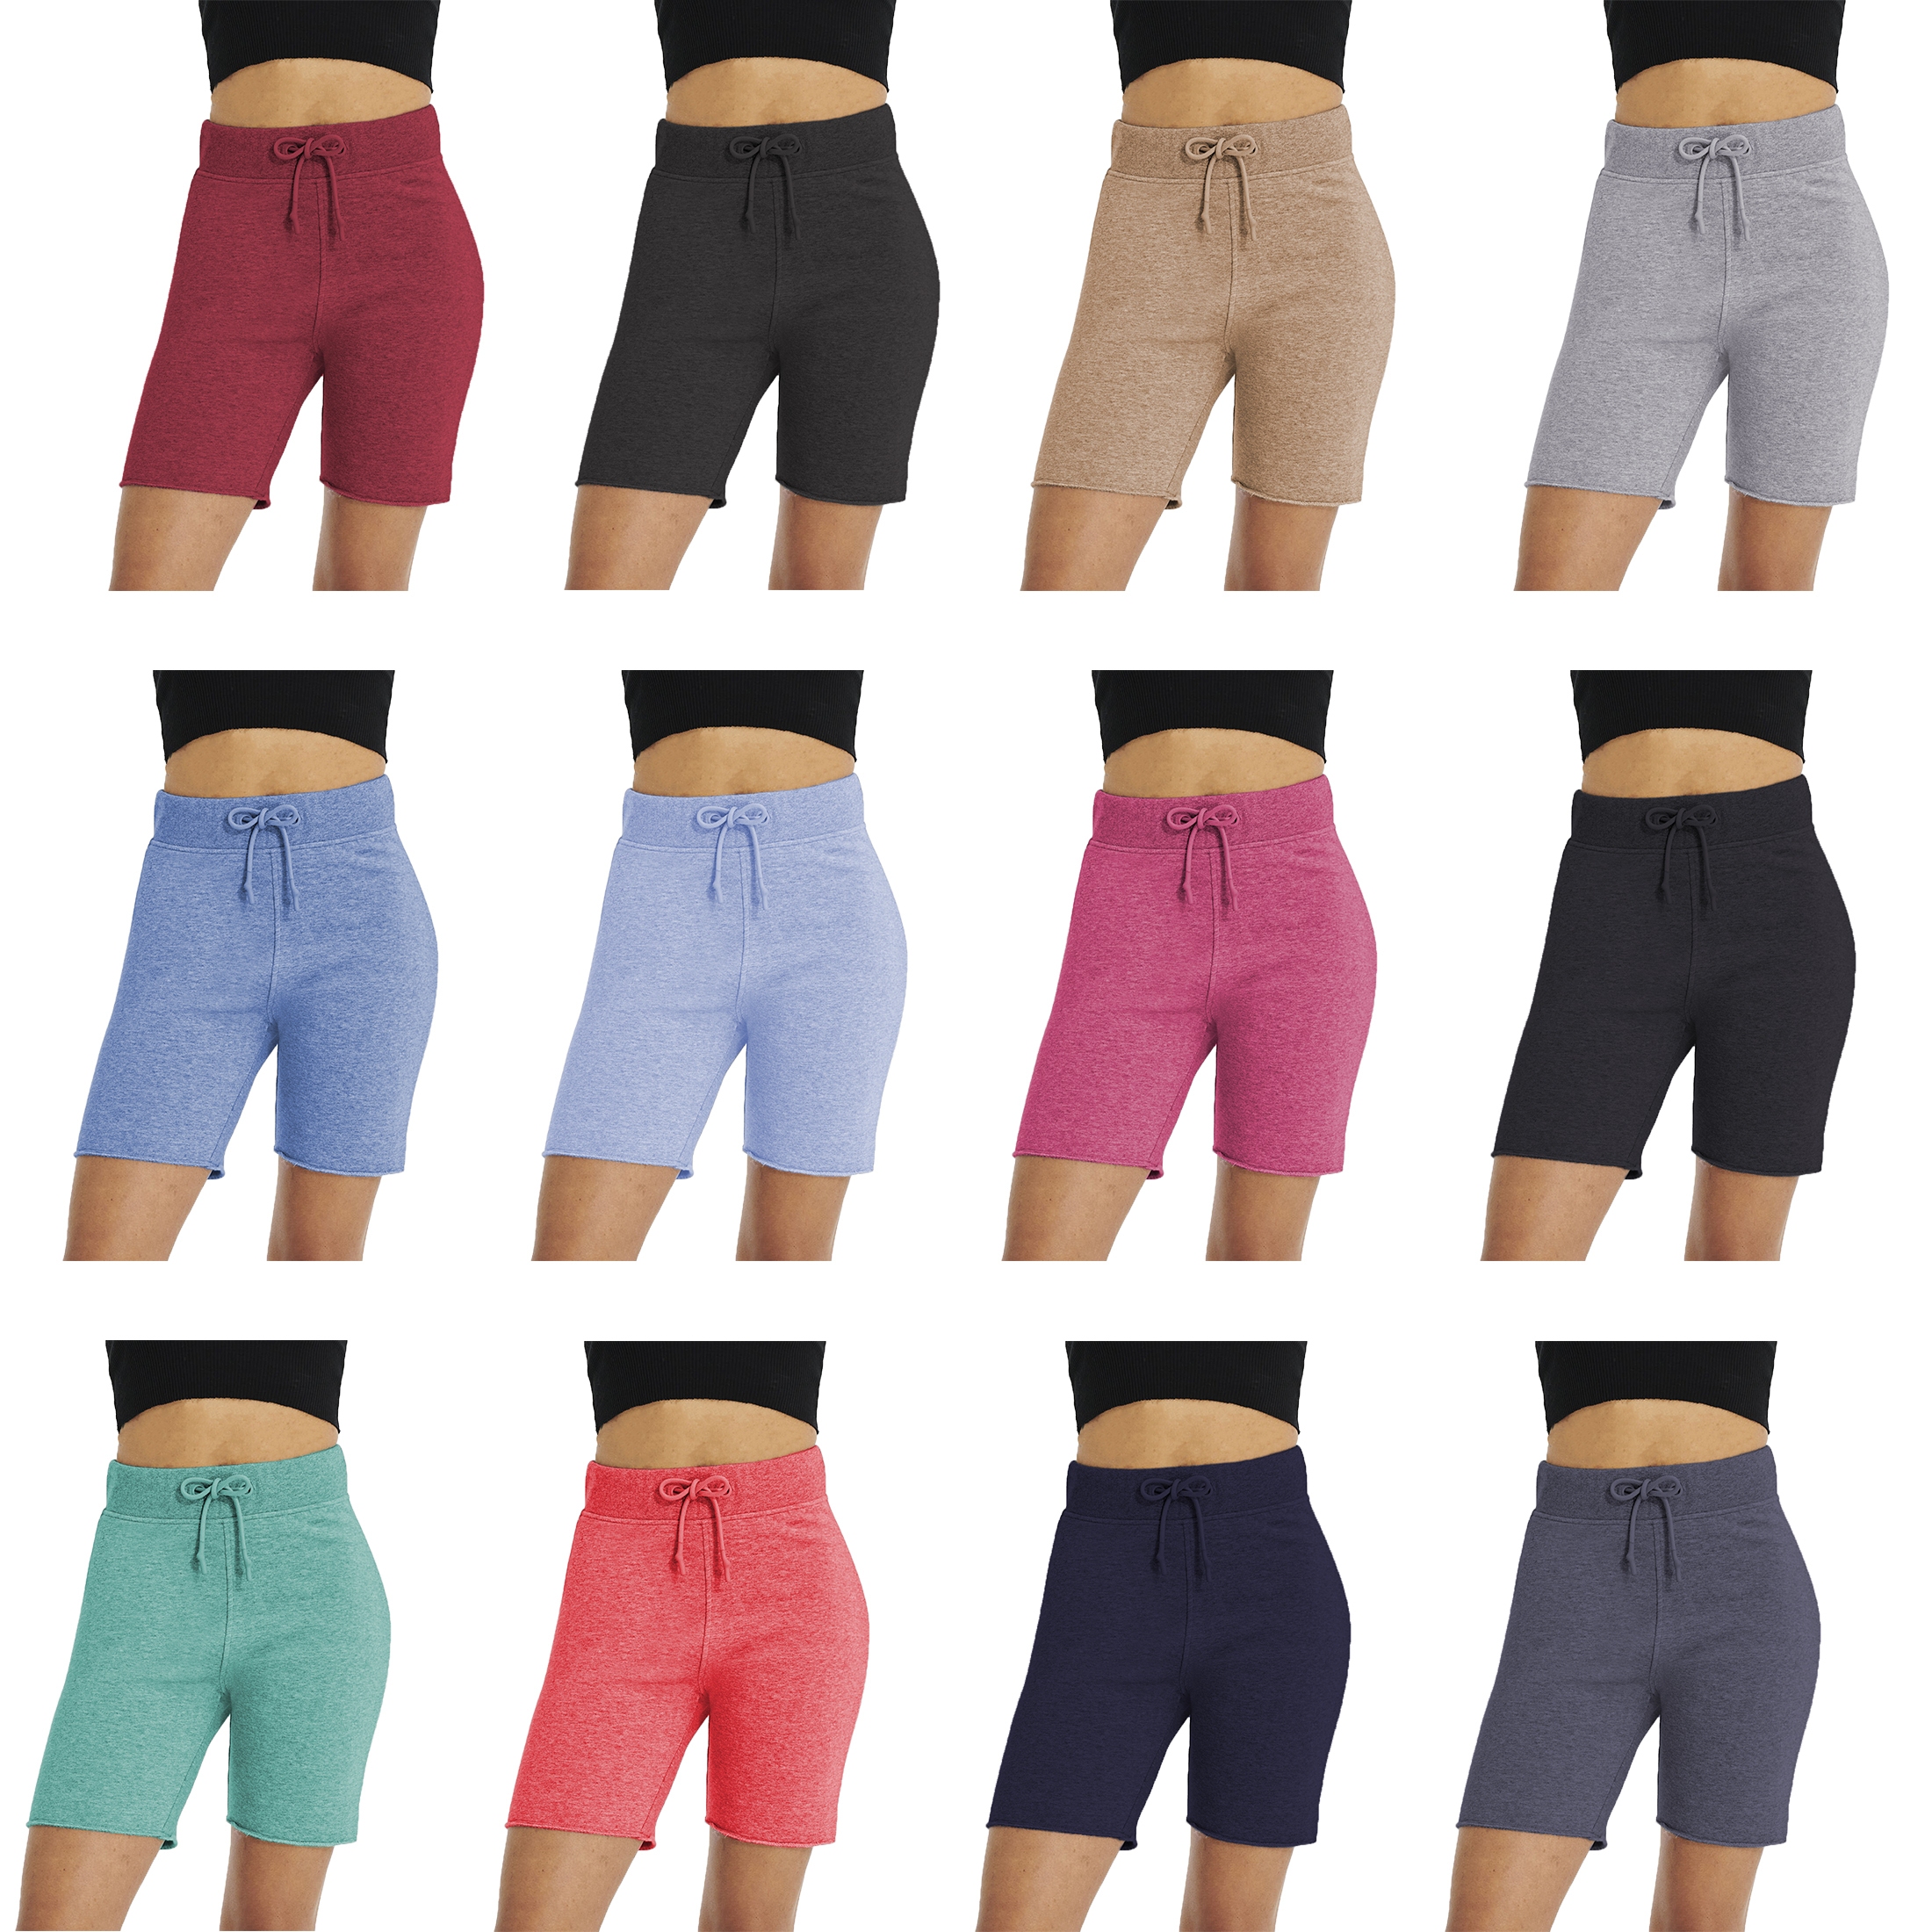 4-Pack Women’s Solid Summer Bermuda Shorts Soft Slim-Fit Stretchy Active Athletic Skinny Ladies Pants - S